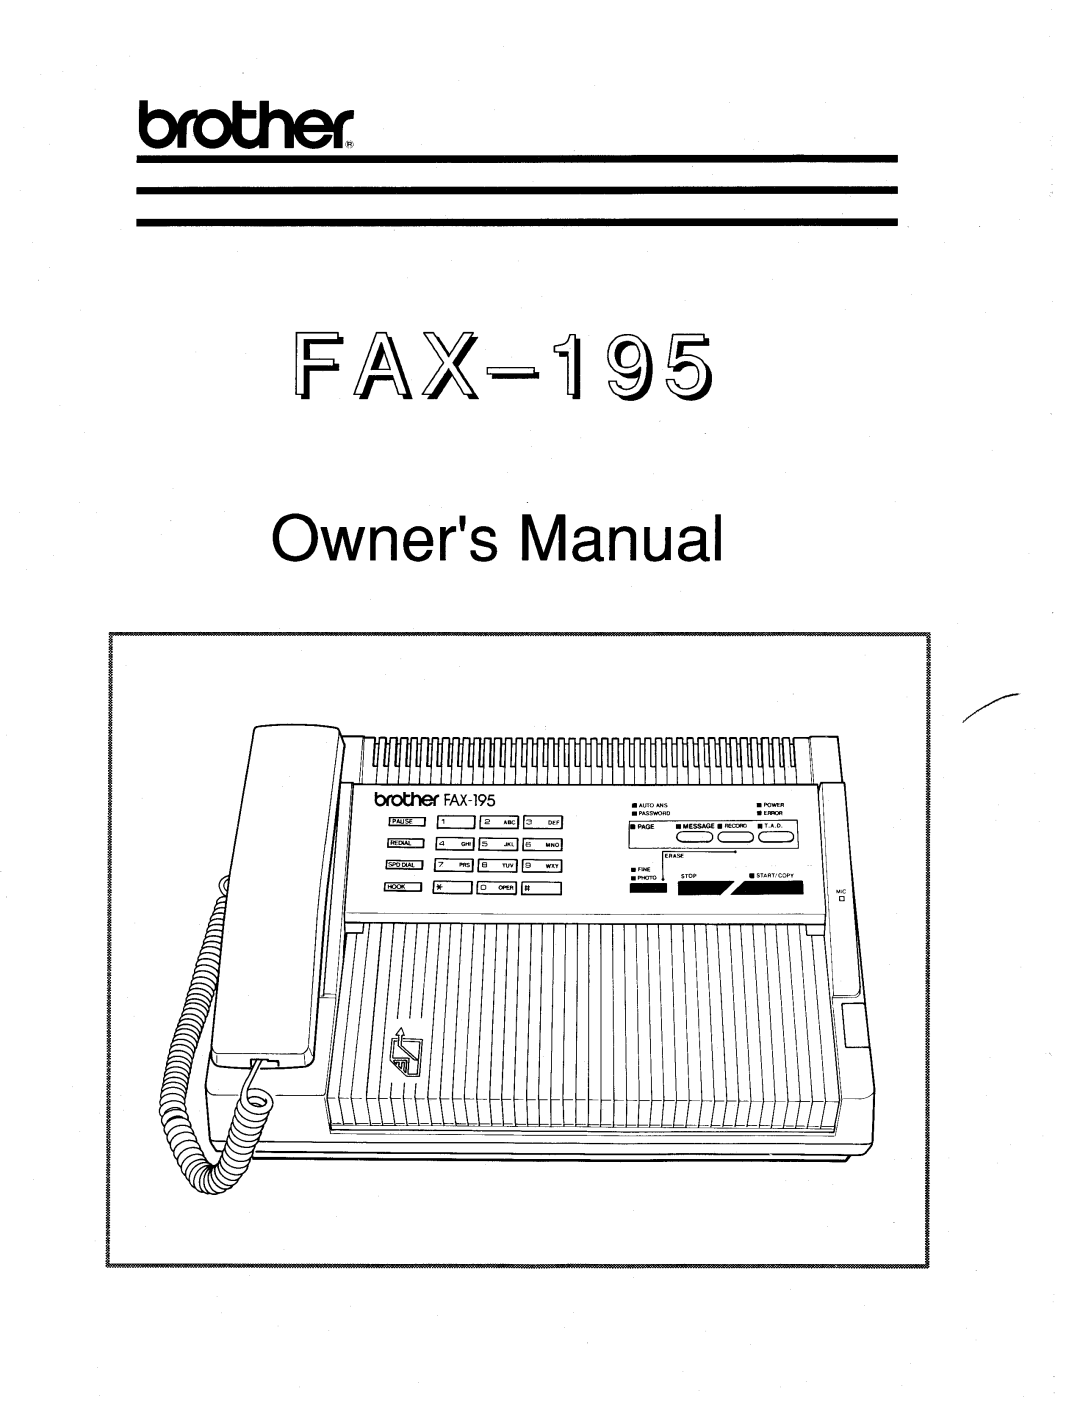 Brother FAX-195 manual 